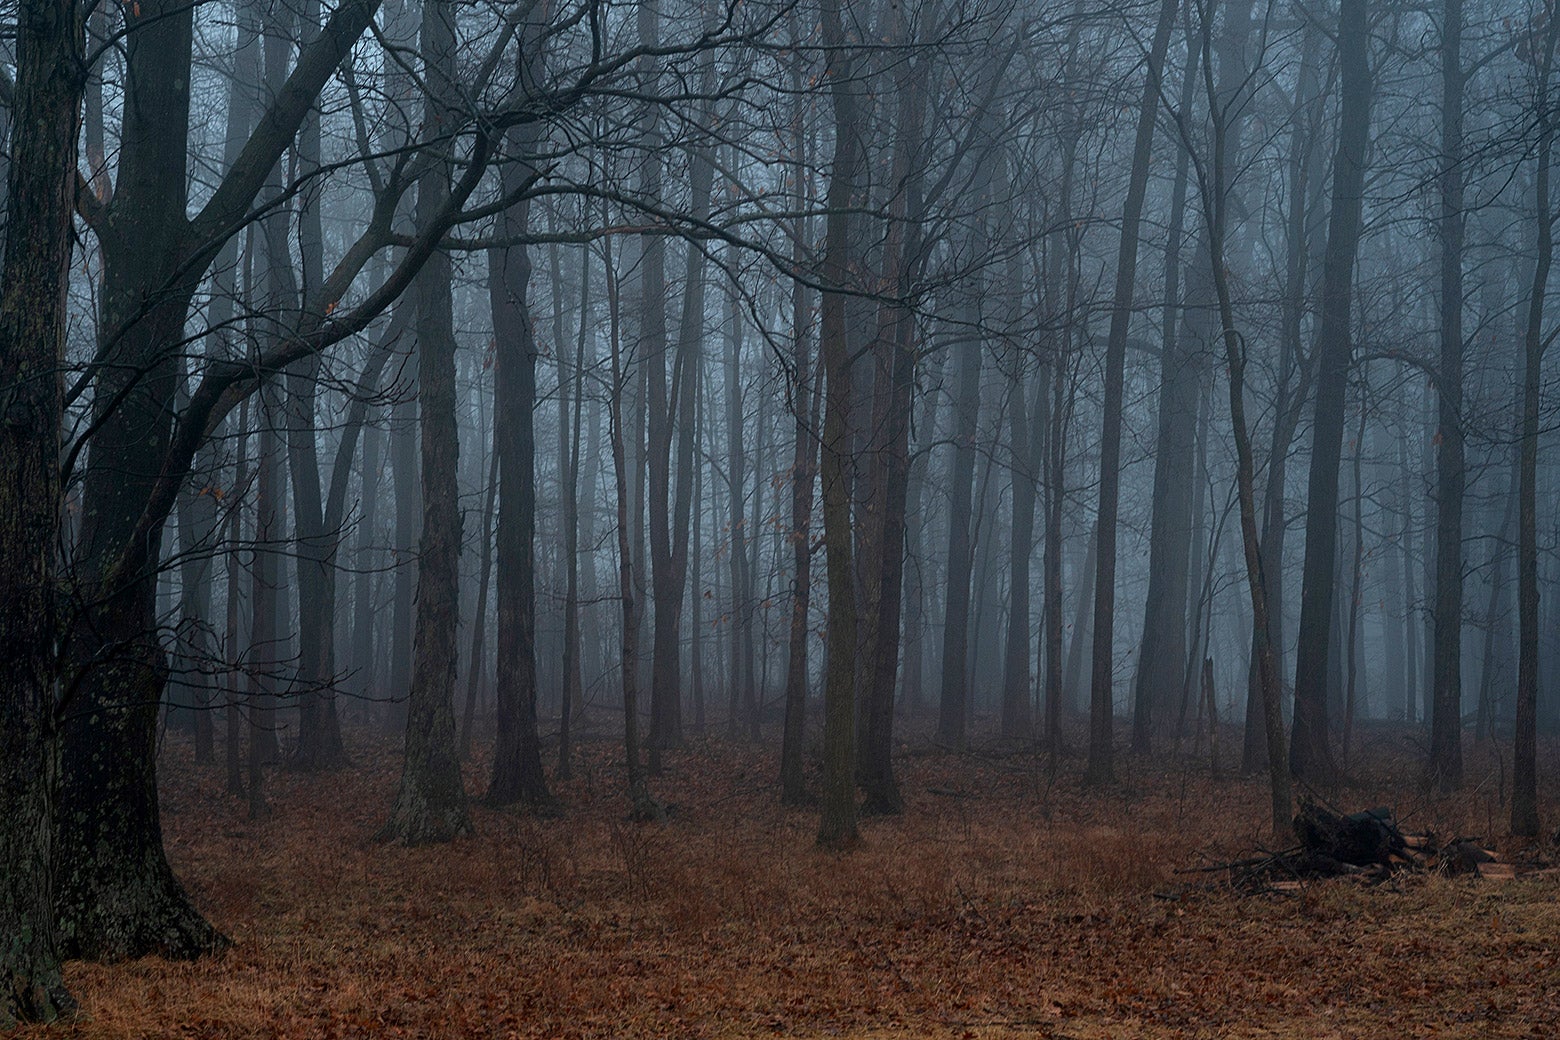 A misty, darkening forest of trees above a bed of red leaves.